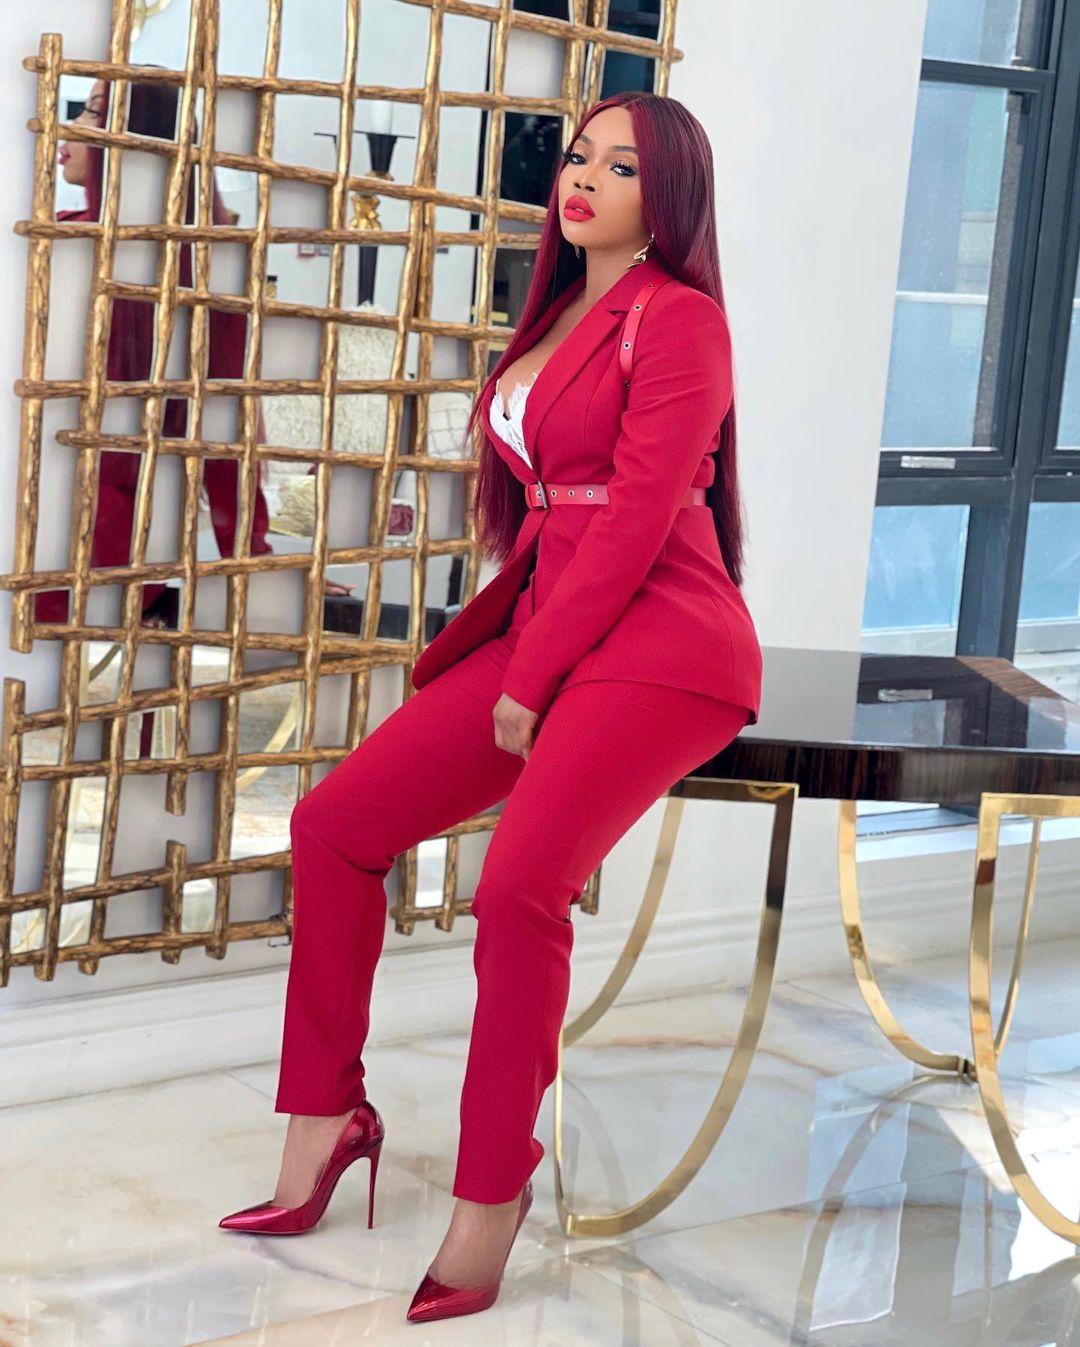 Toke Makinwa- Keeping It Exciting And Formal